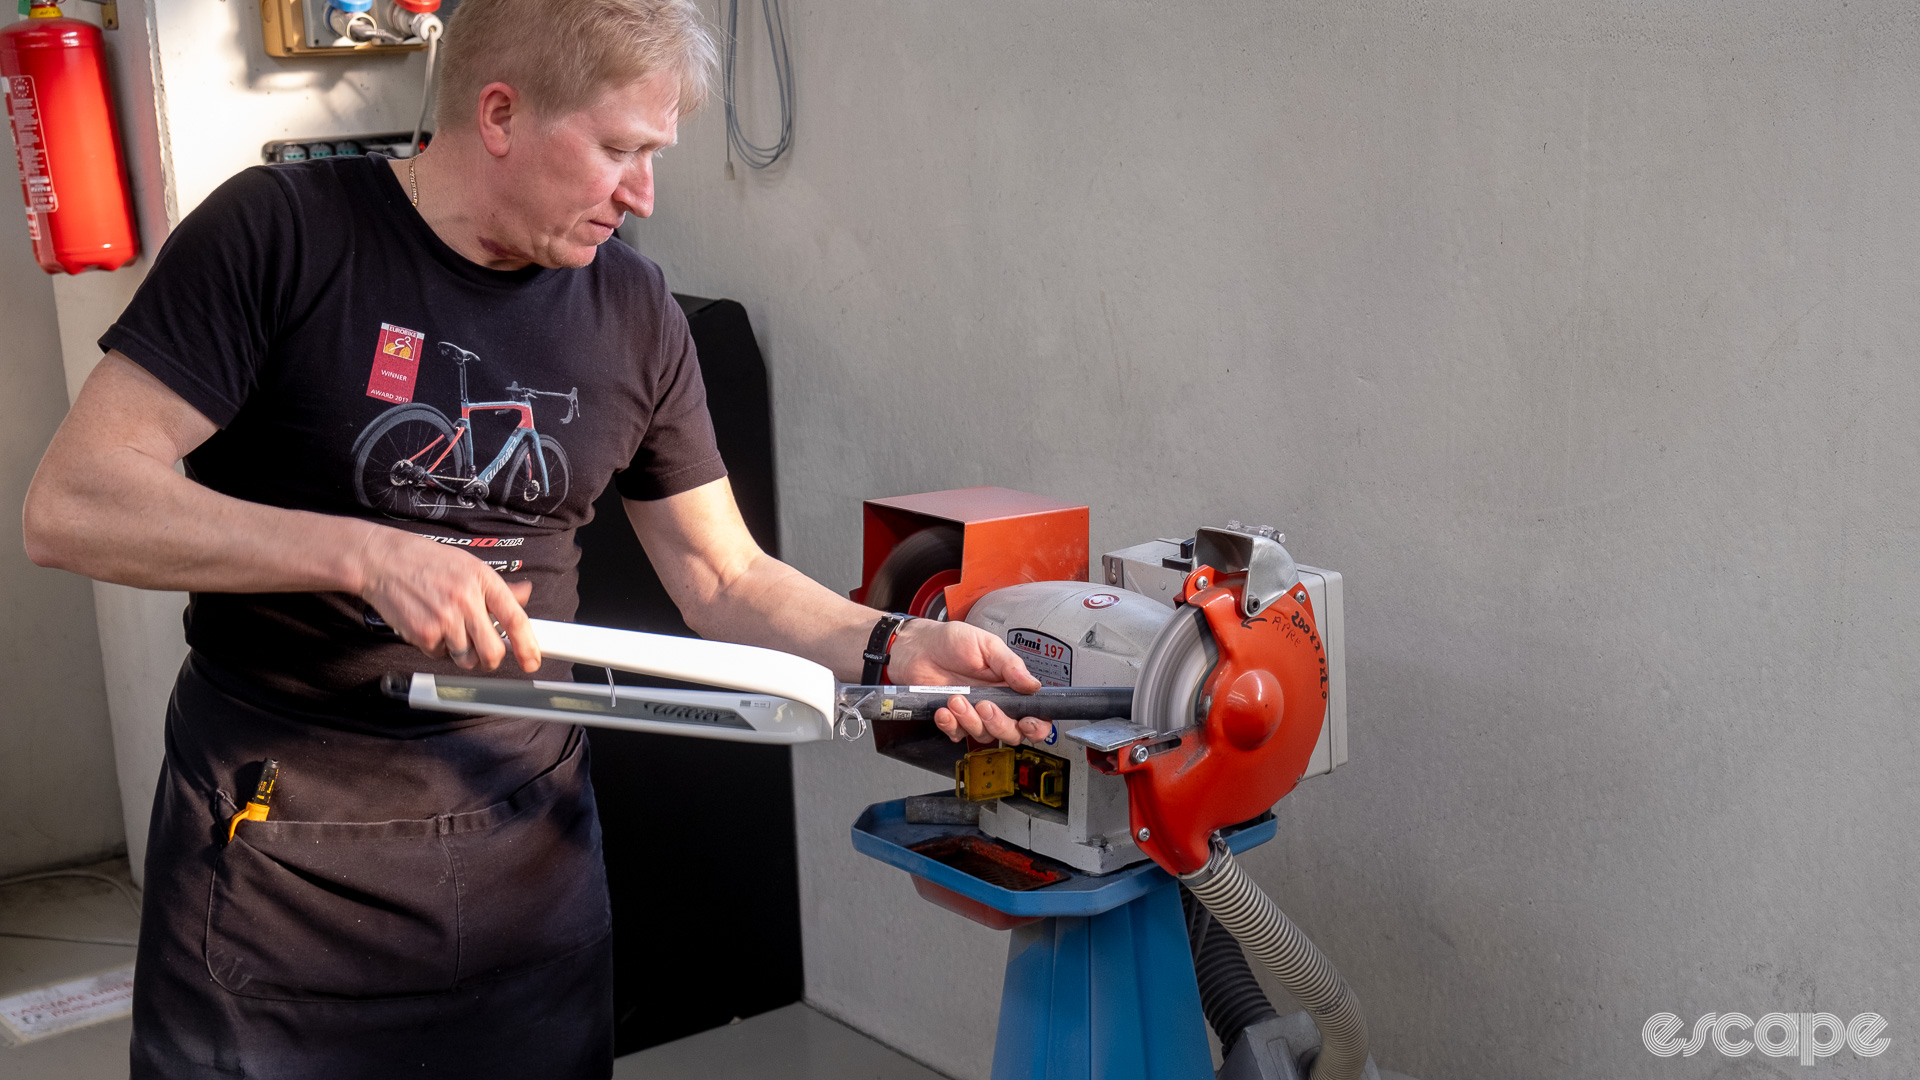 The photo shows a mechanic sanding a steerer tube on a bench grinder. 